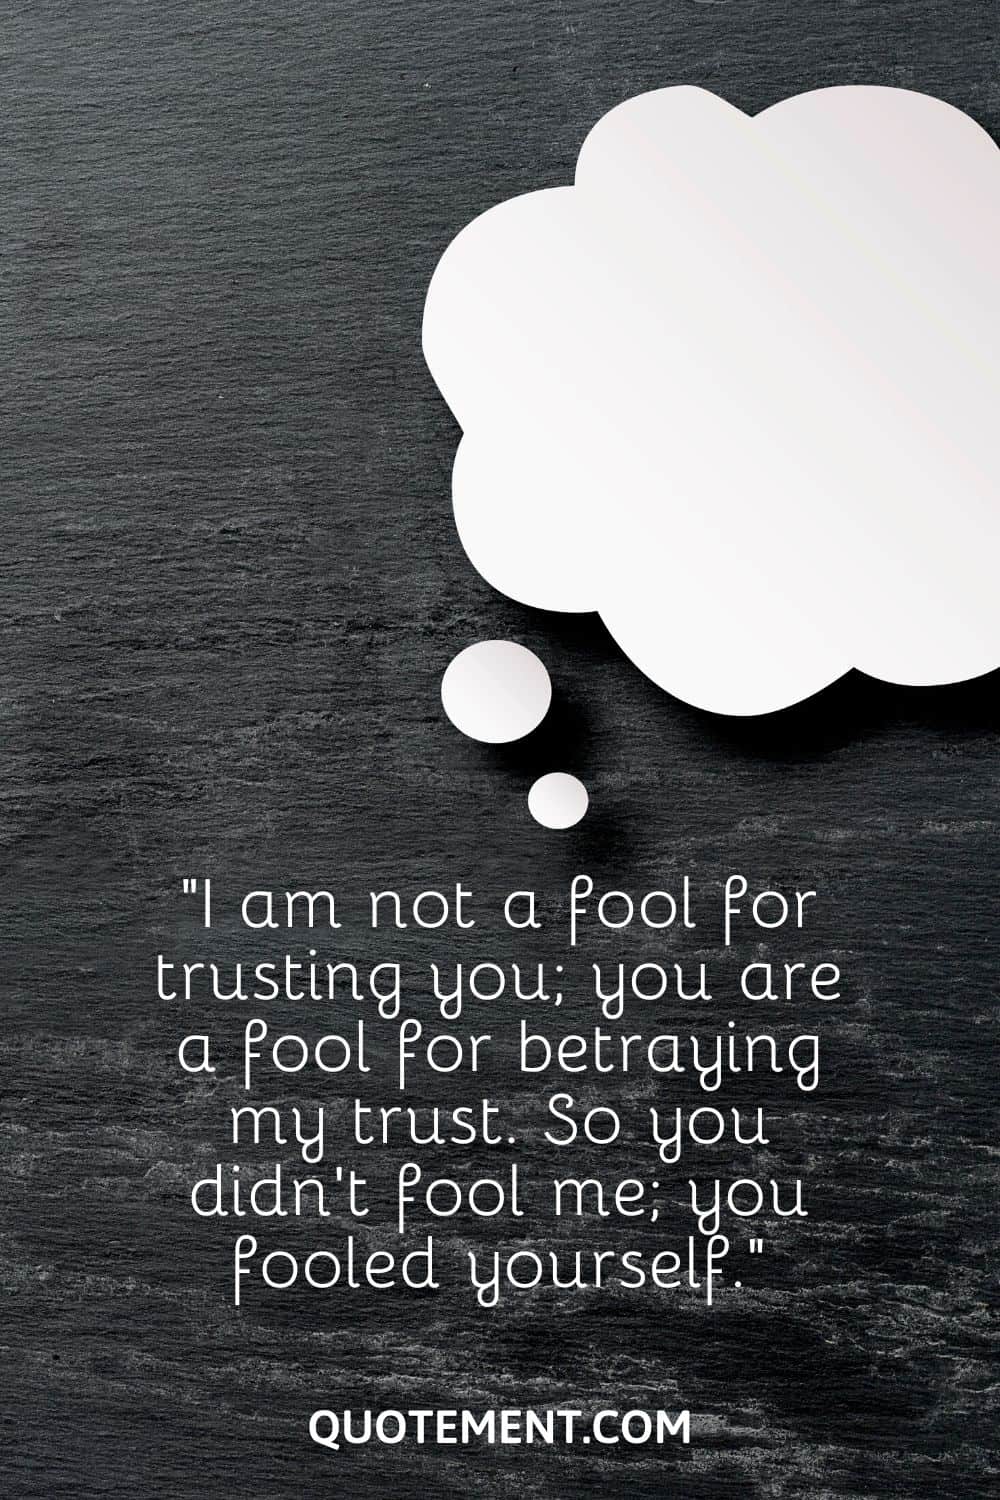 “I am not a fool for trusting you; you are a fool for betraying my trust. So you didn’t fool me; you fooled yourself.”